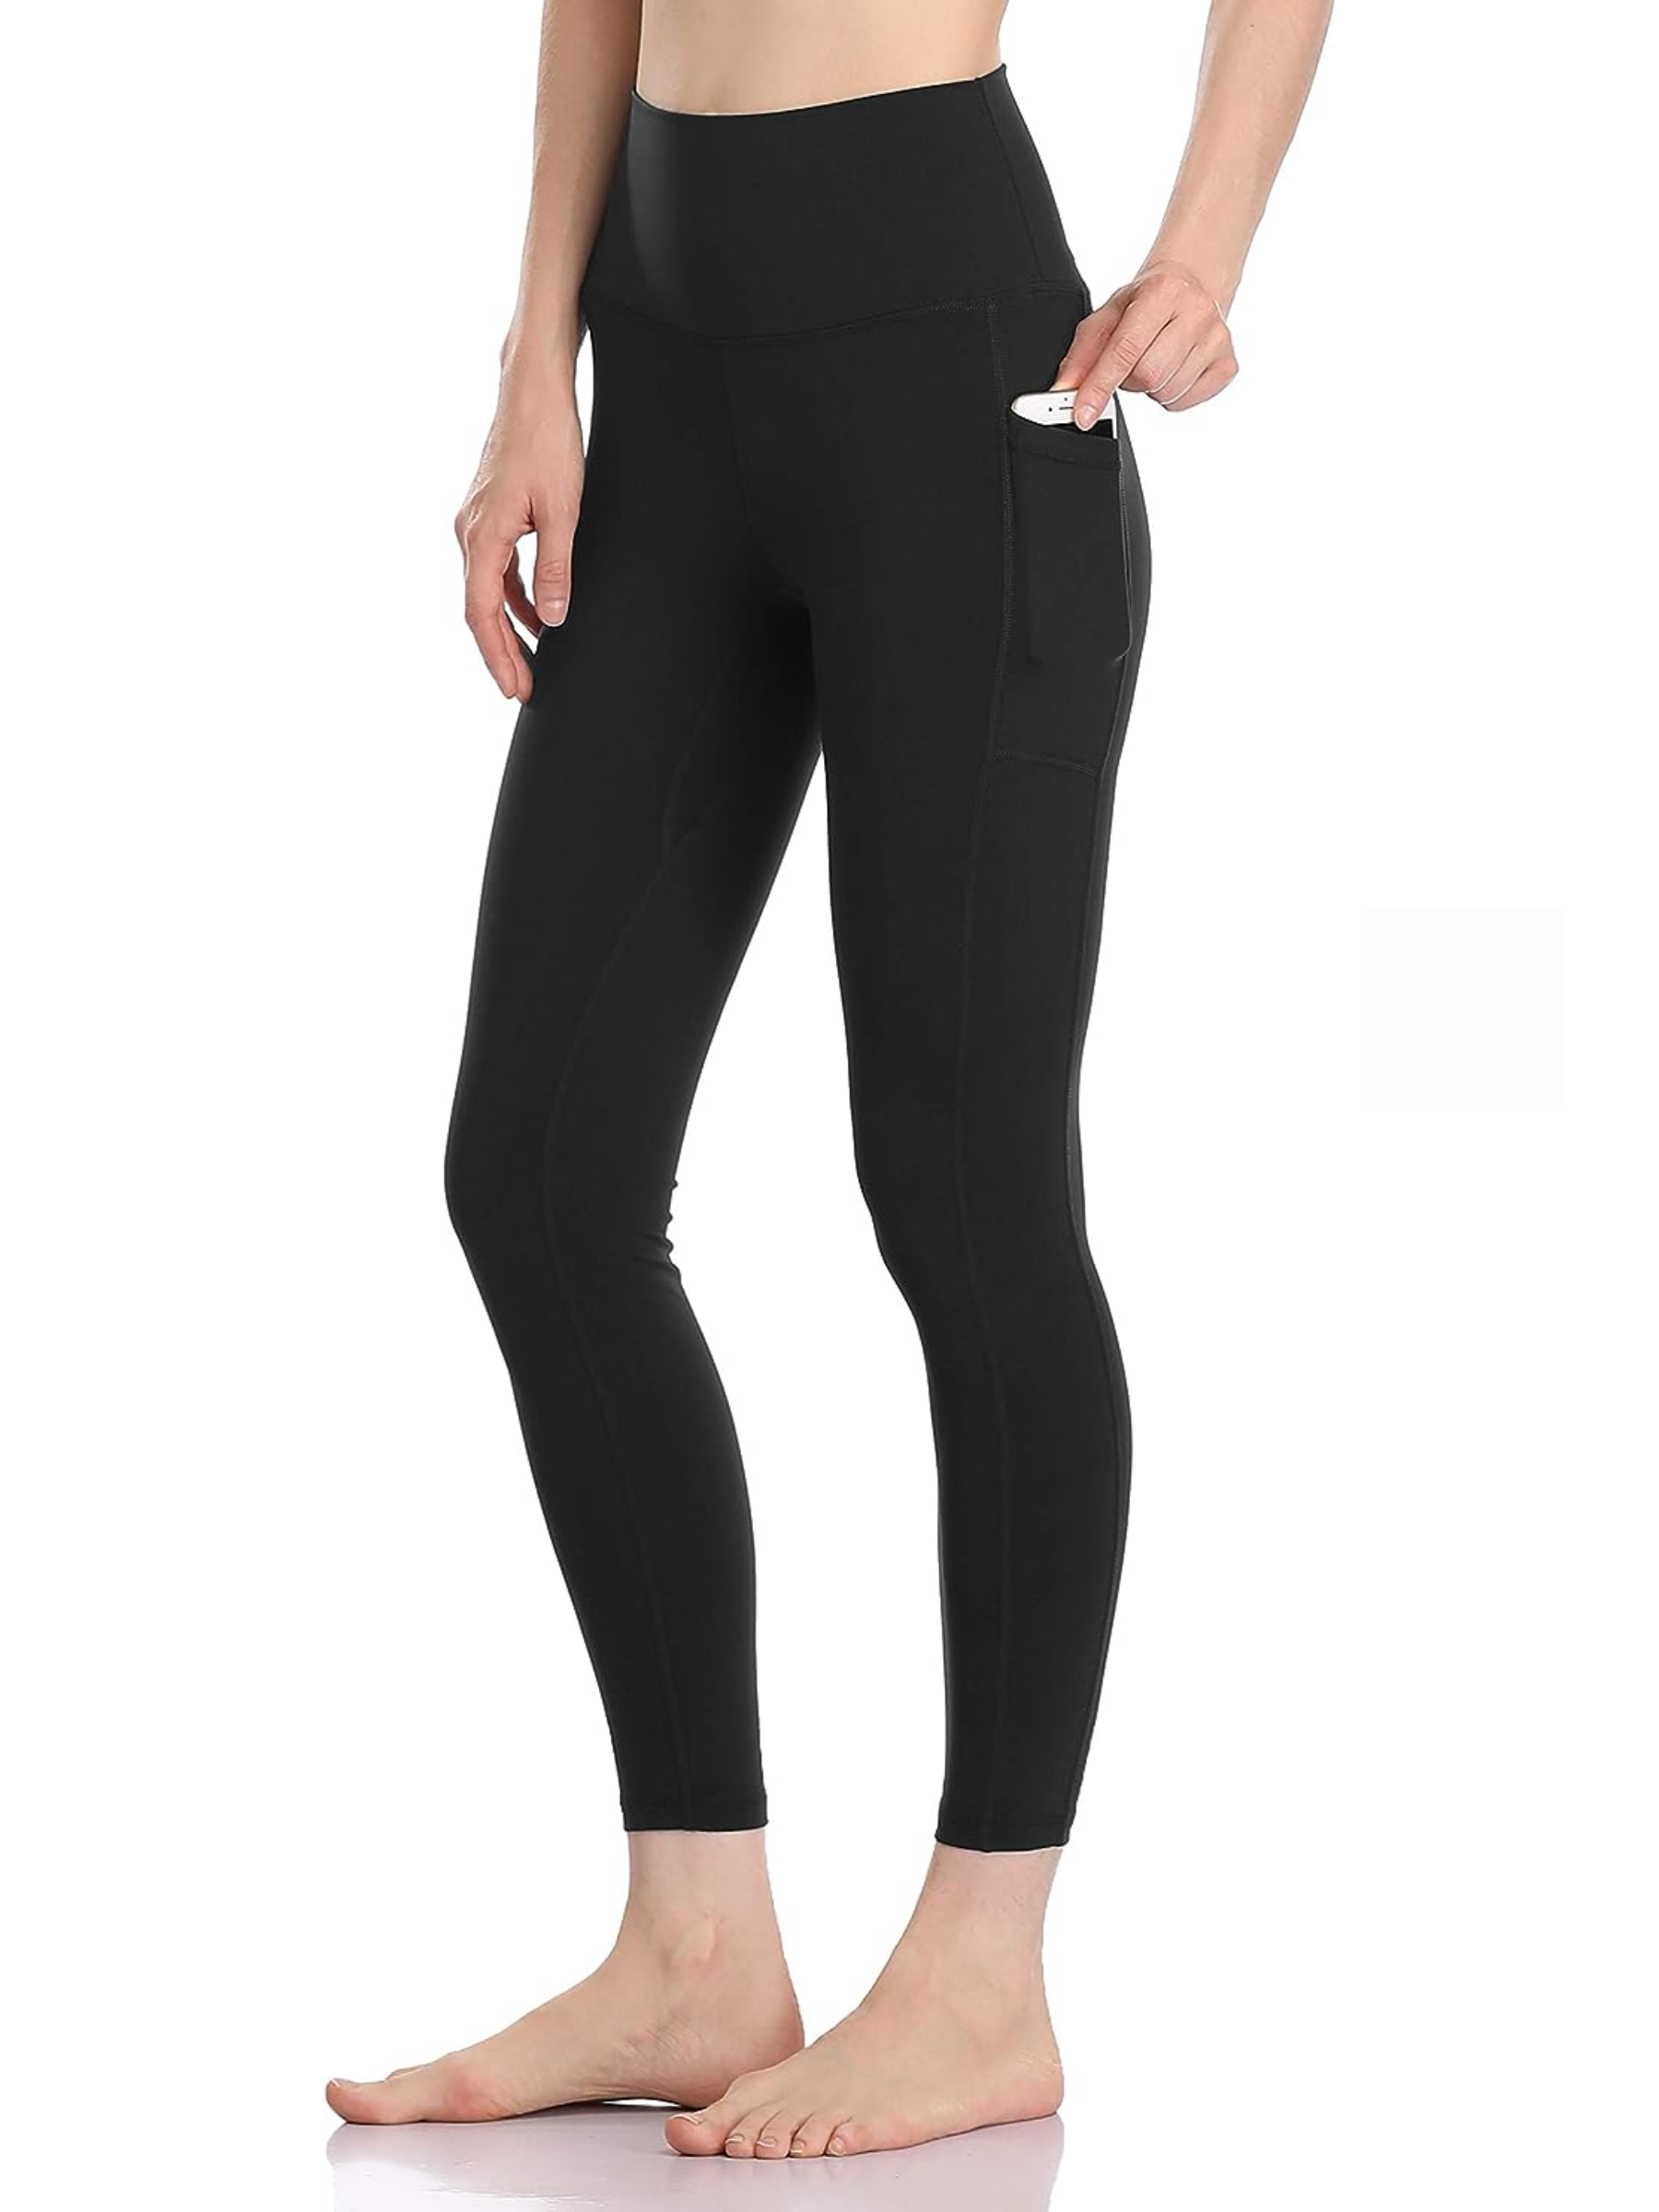 Some of the most beloved <a href="https://www.glamour.com/gallery/best-leggings-on-amazon?mbid=synd_msn_rss&utm_source=msn&utm_medium=syndication">leggings on Amazon</a>, this pair will please serious athletes and homebodies alike. It comes with pockets and ultra-stretchy material—and who couldn’t use another pair of <a href="https://www.glamour.com/gallery/best-black-leggings-to-buy-now?mbid=synd_msn_rss&utm_source=msn&utm_medium=syndication">black leggings</a> on hand? $25, Amazon. <a href="https://www.amazon.com/Colorfulkoala-Waisted-Control-Workout-Leggings/dp/B07G55R2LB/">Get it now!</a><p>Sign up for today’s biggest stories, from pop culture to politics.</p><a href="https://www.glamour.com/newsletter/news?sourceCode=msnsend">Sign Up</a>